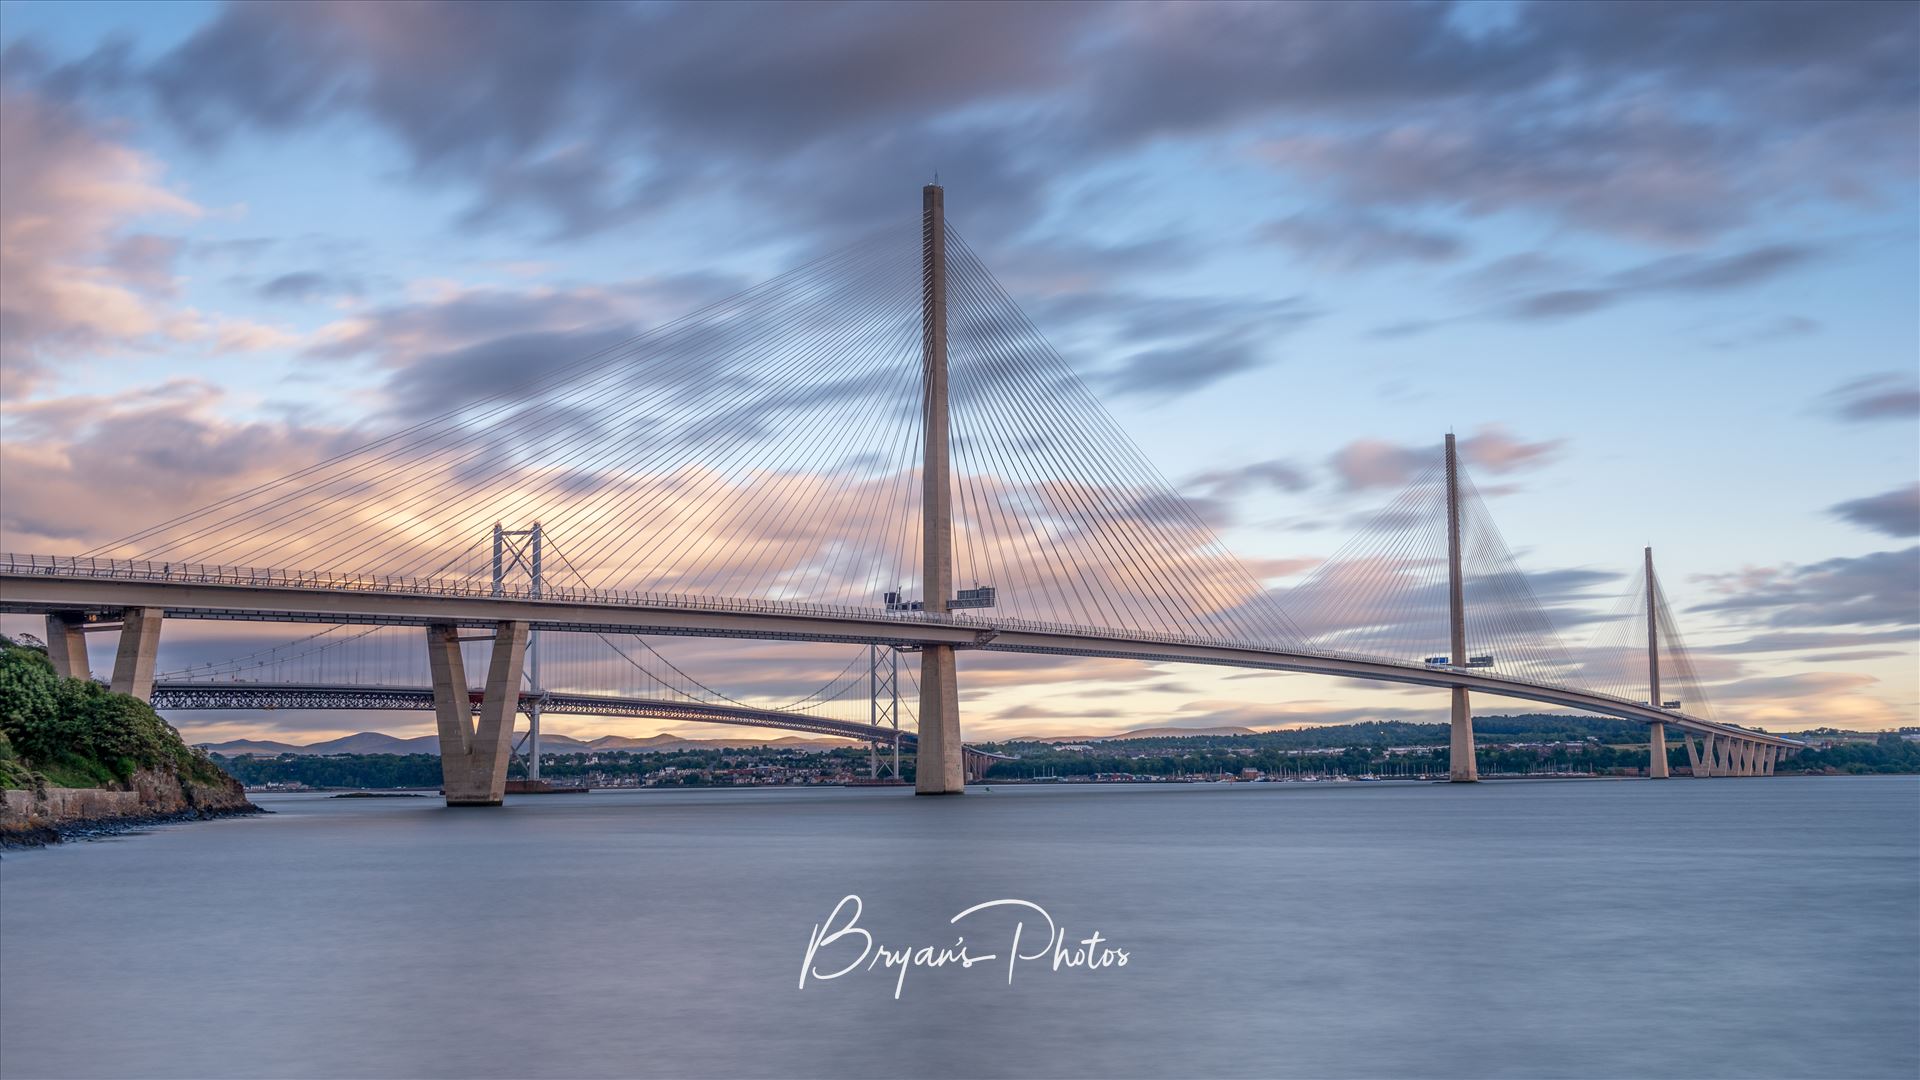 Queensferry Crossing Panorama A panoramic photograph of the Queensferry Crossing taken from the north bank of the River Forth. by Bryans Photos